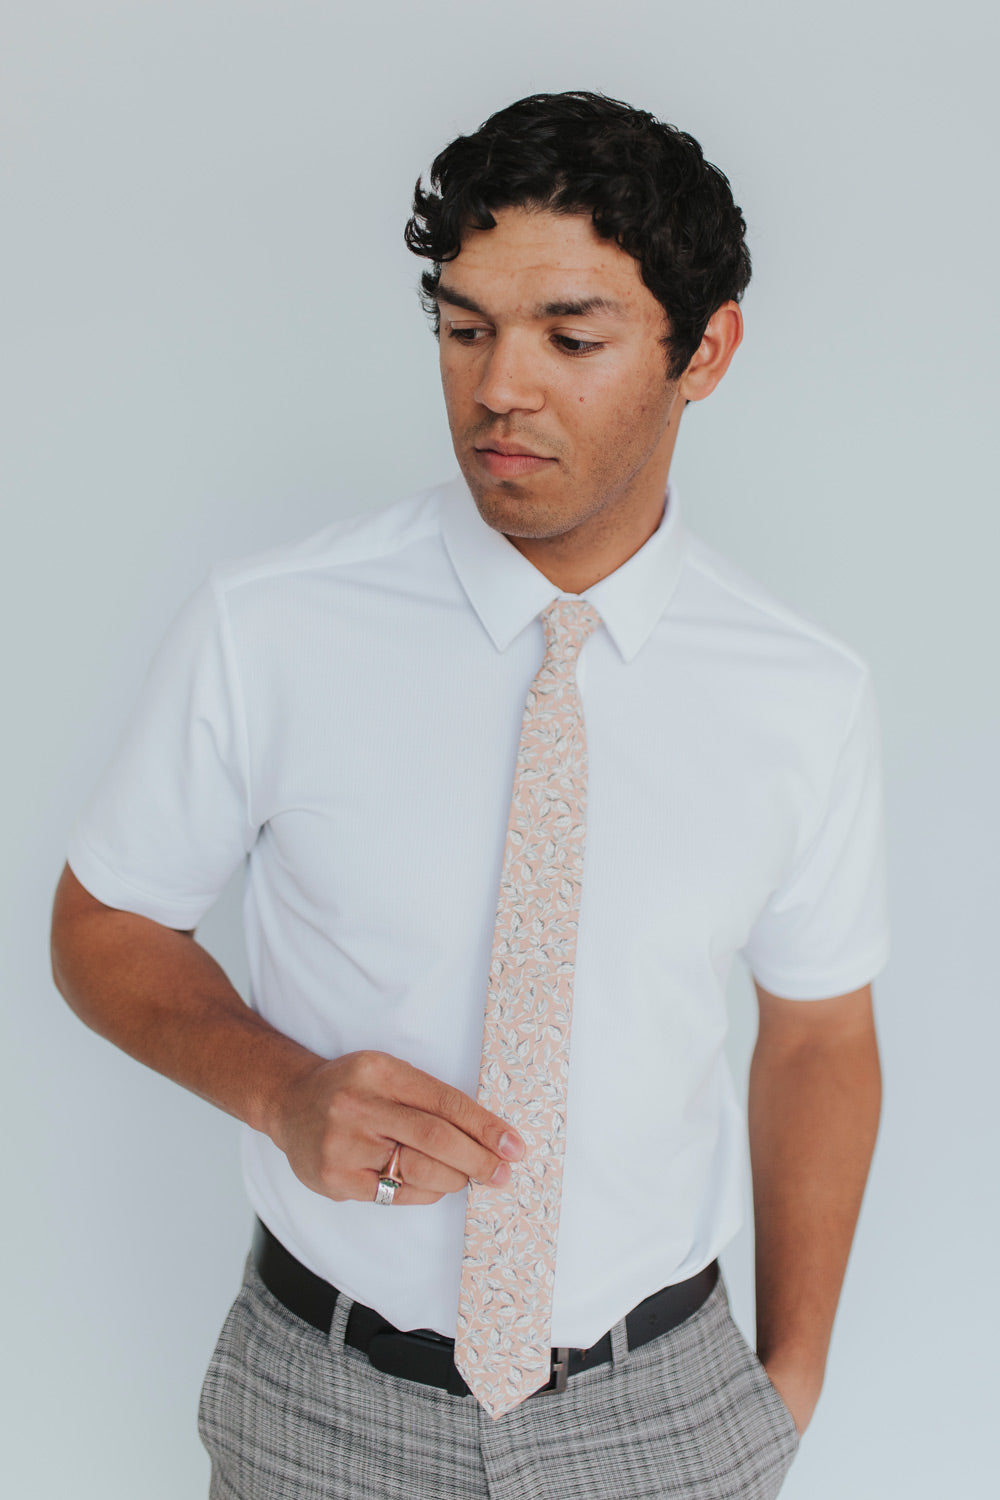 Georgia Belle Tie worn with a white shirt, black belt and gray plaid suit pants. 